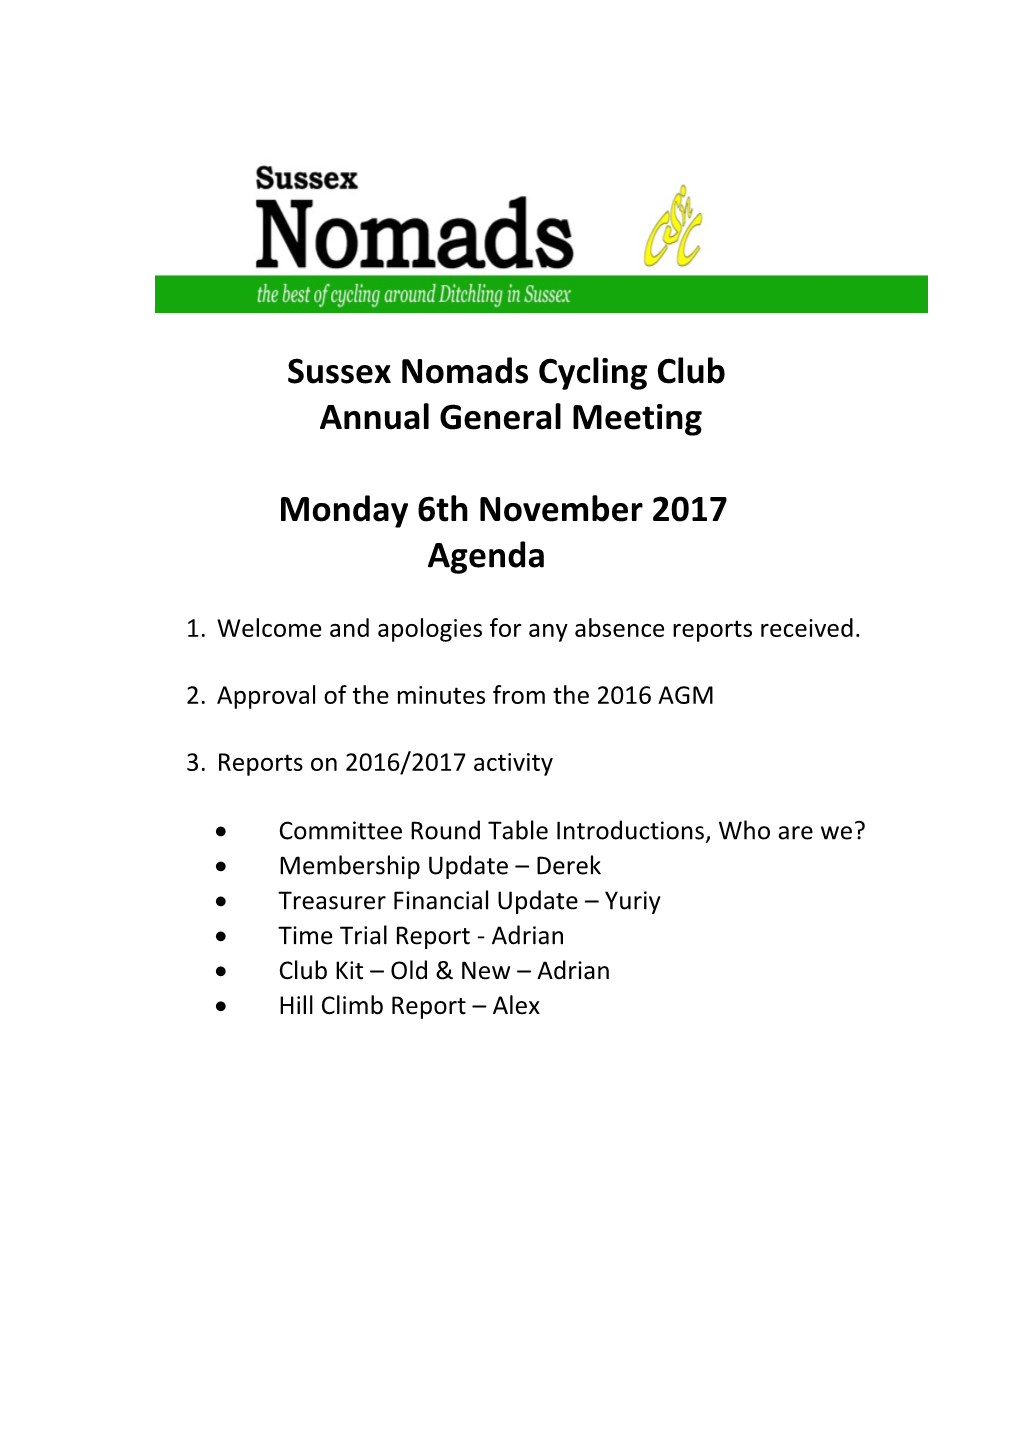 Outline Annual General Meeting Agenda